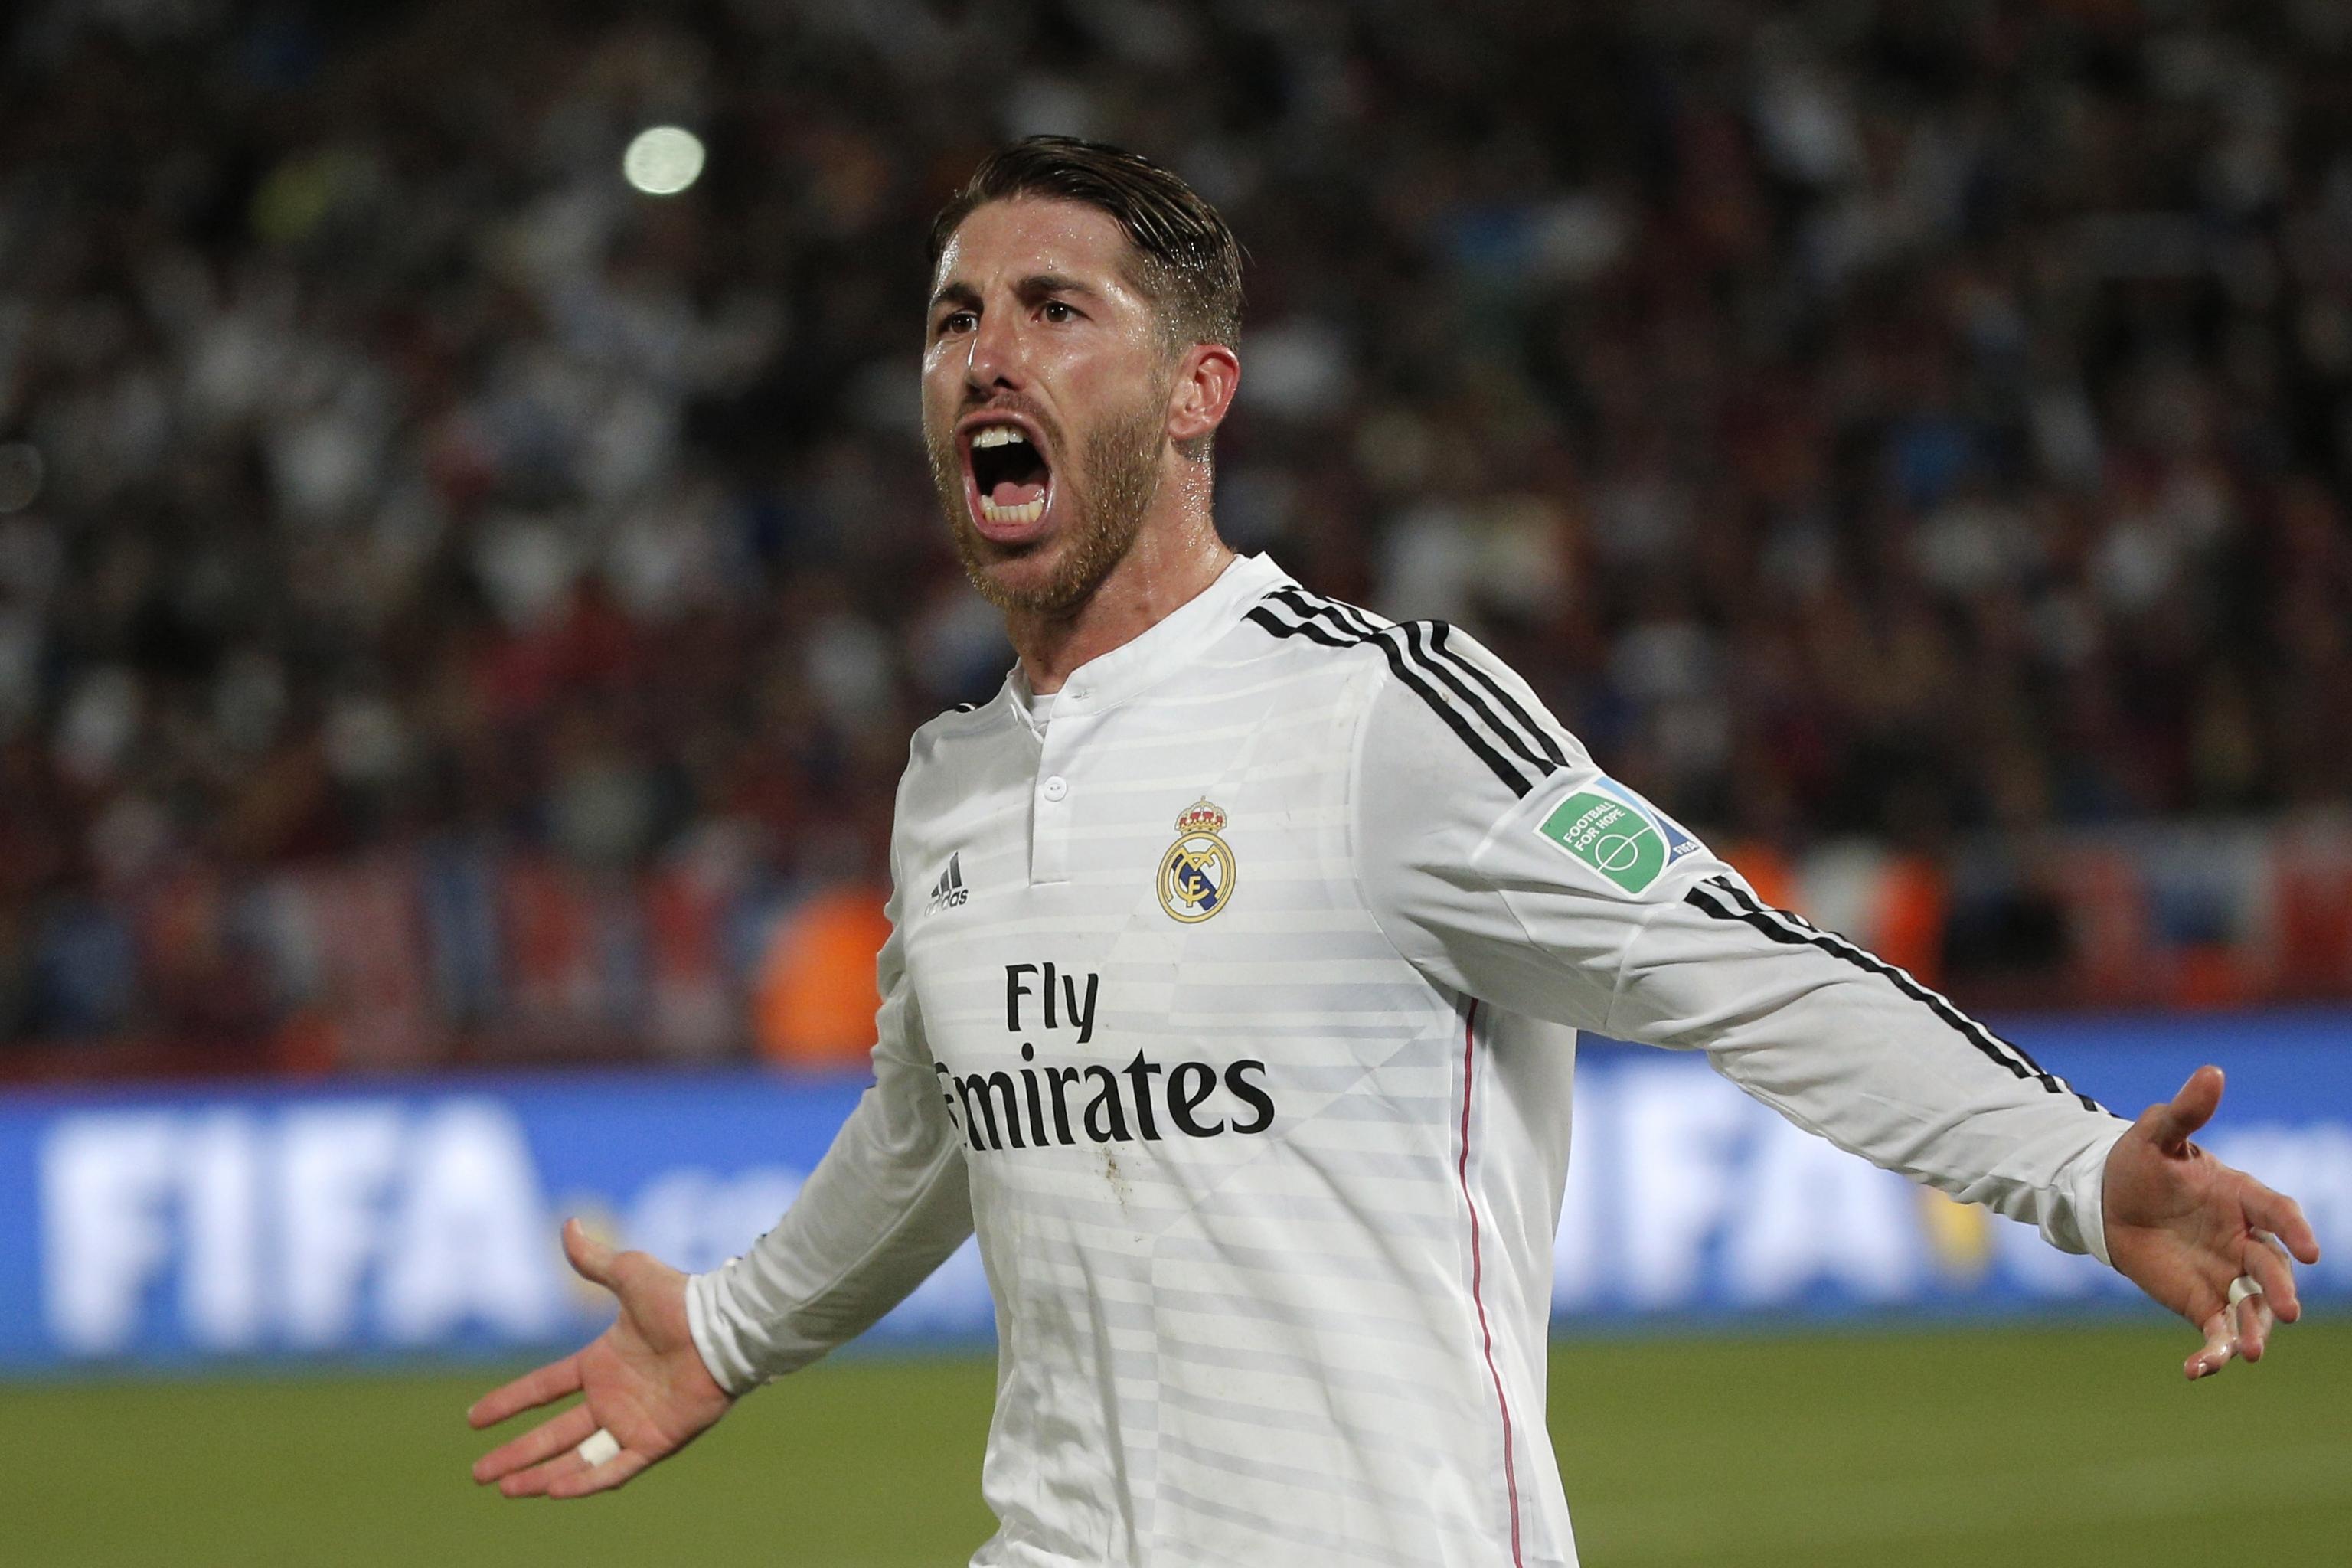 Sergio Ramos contract stand-off - could he really leave Real